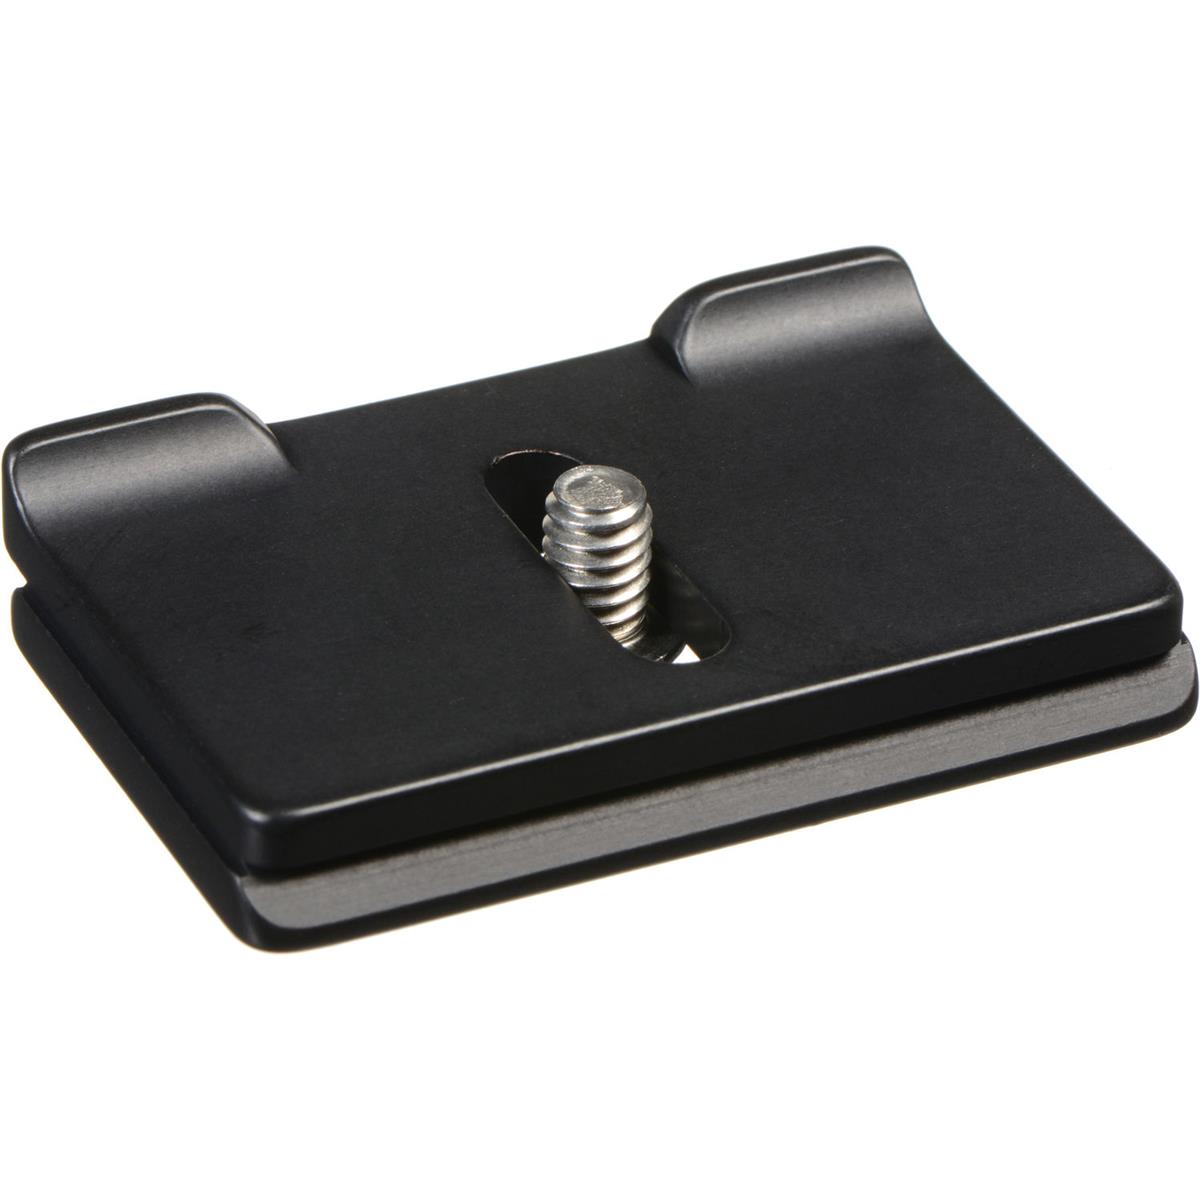 Image of Acratech 2170 Quick Release Plate for Nikon D700